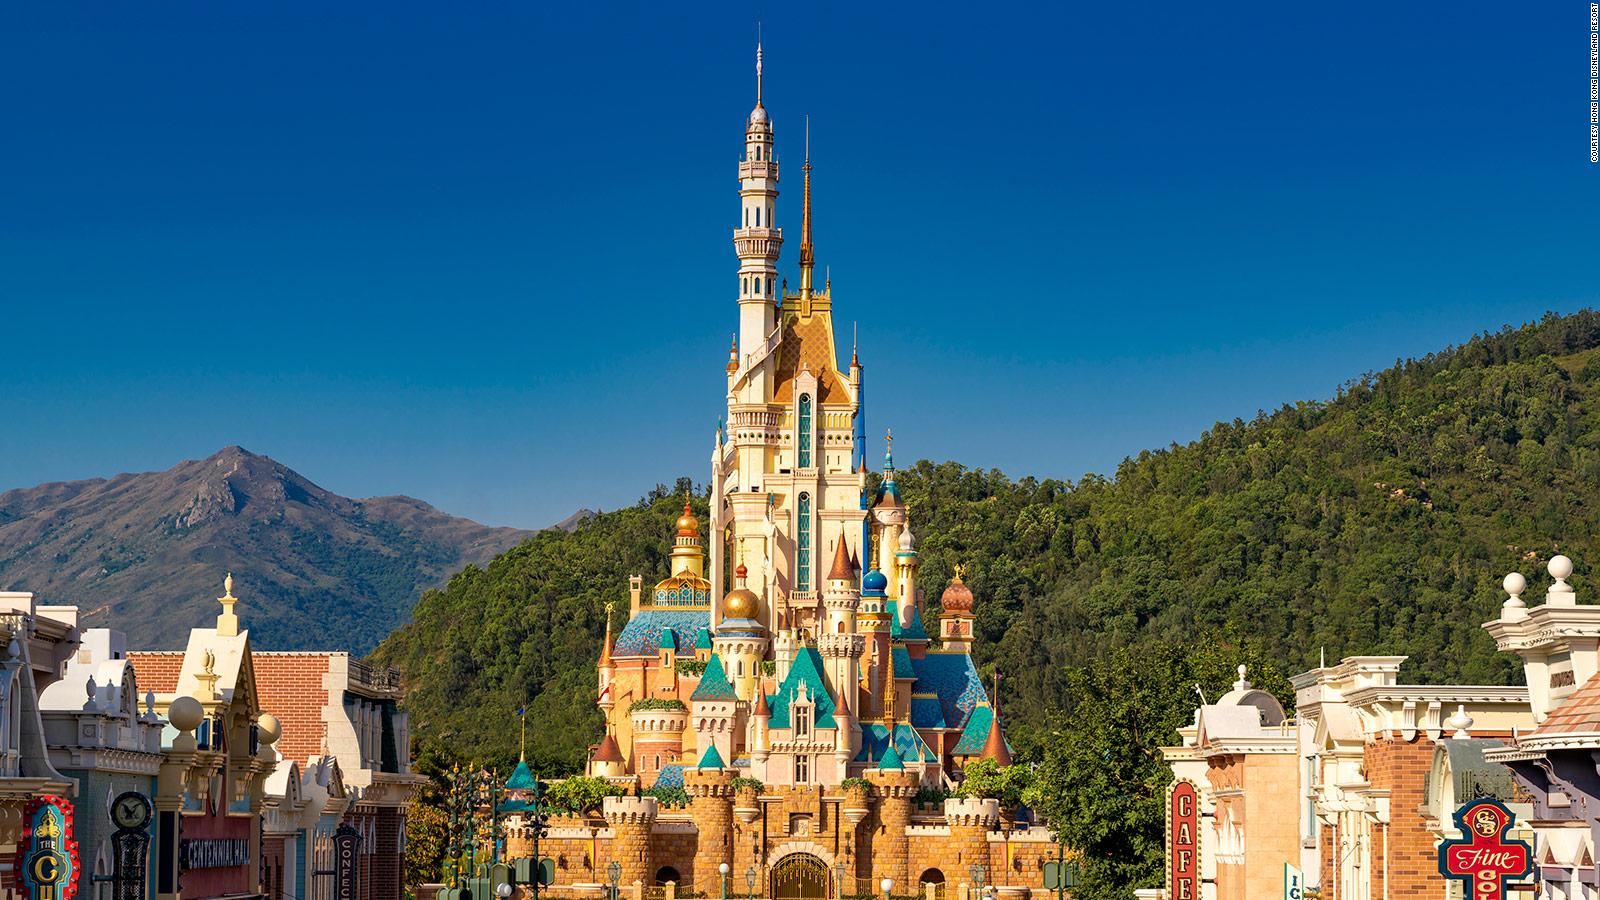 Hong Kong Disneyland's new 'Castle of Magical Dreams' is an architectural  vision of diversity - CNN Style